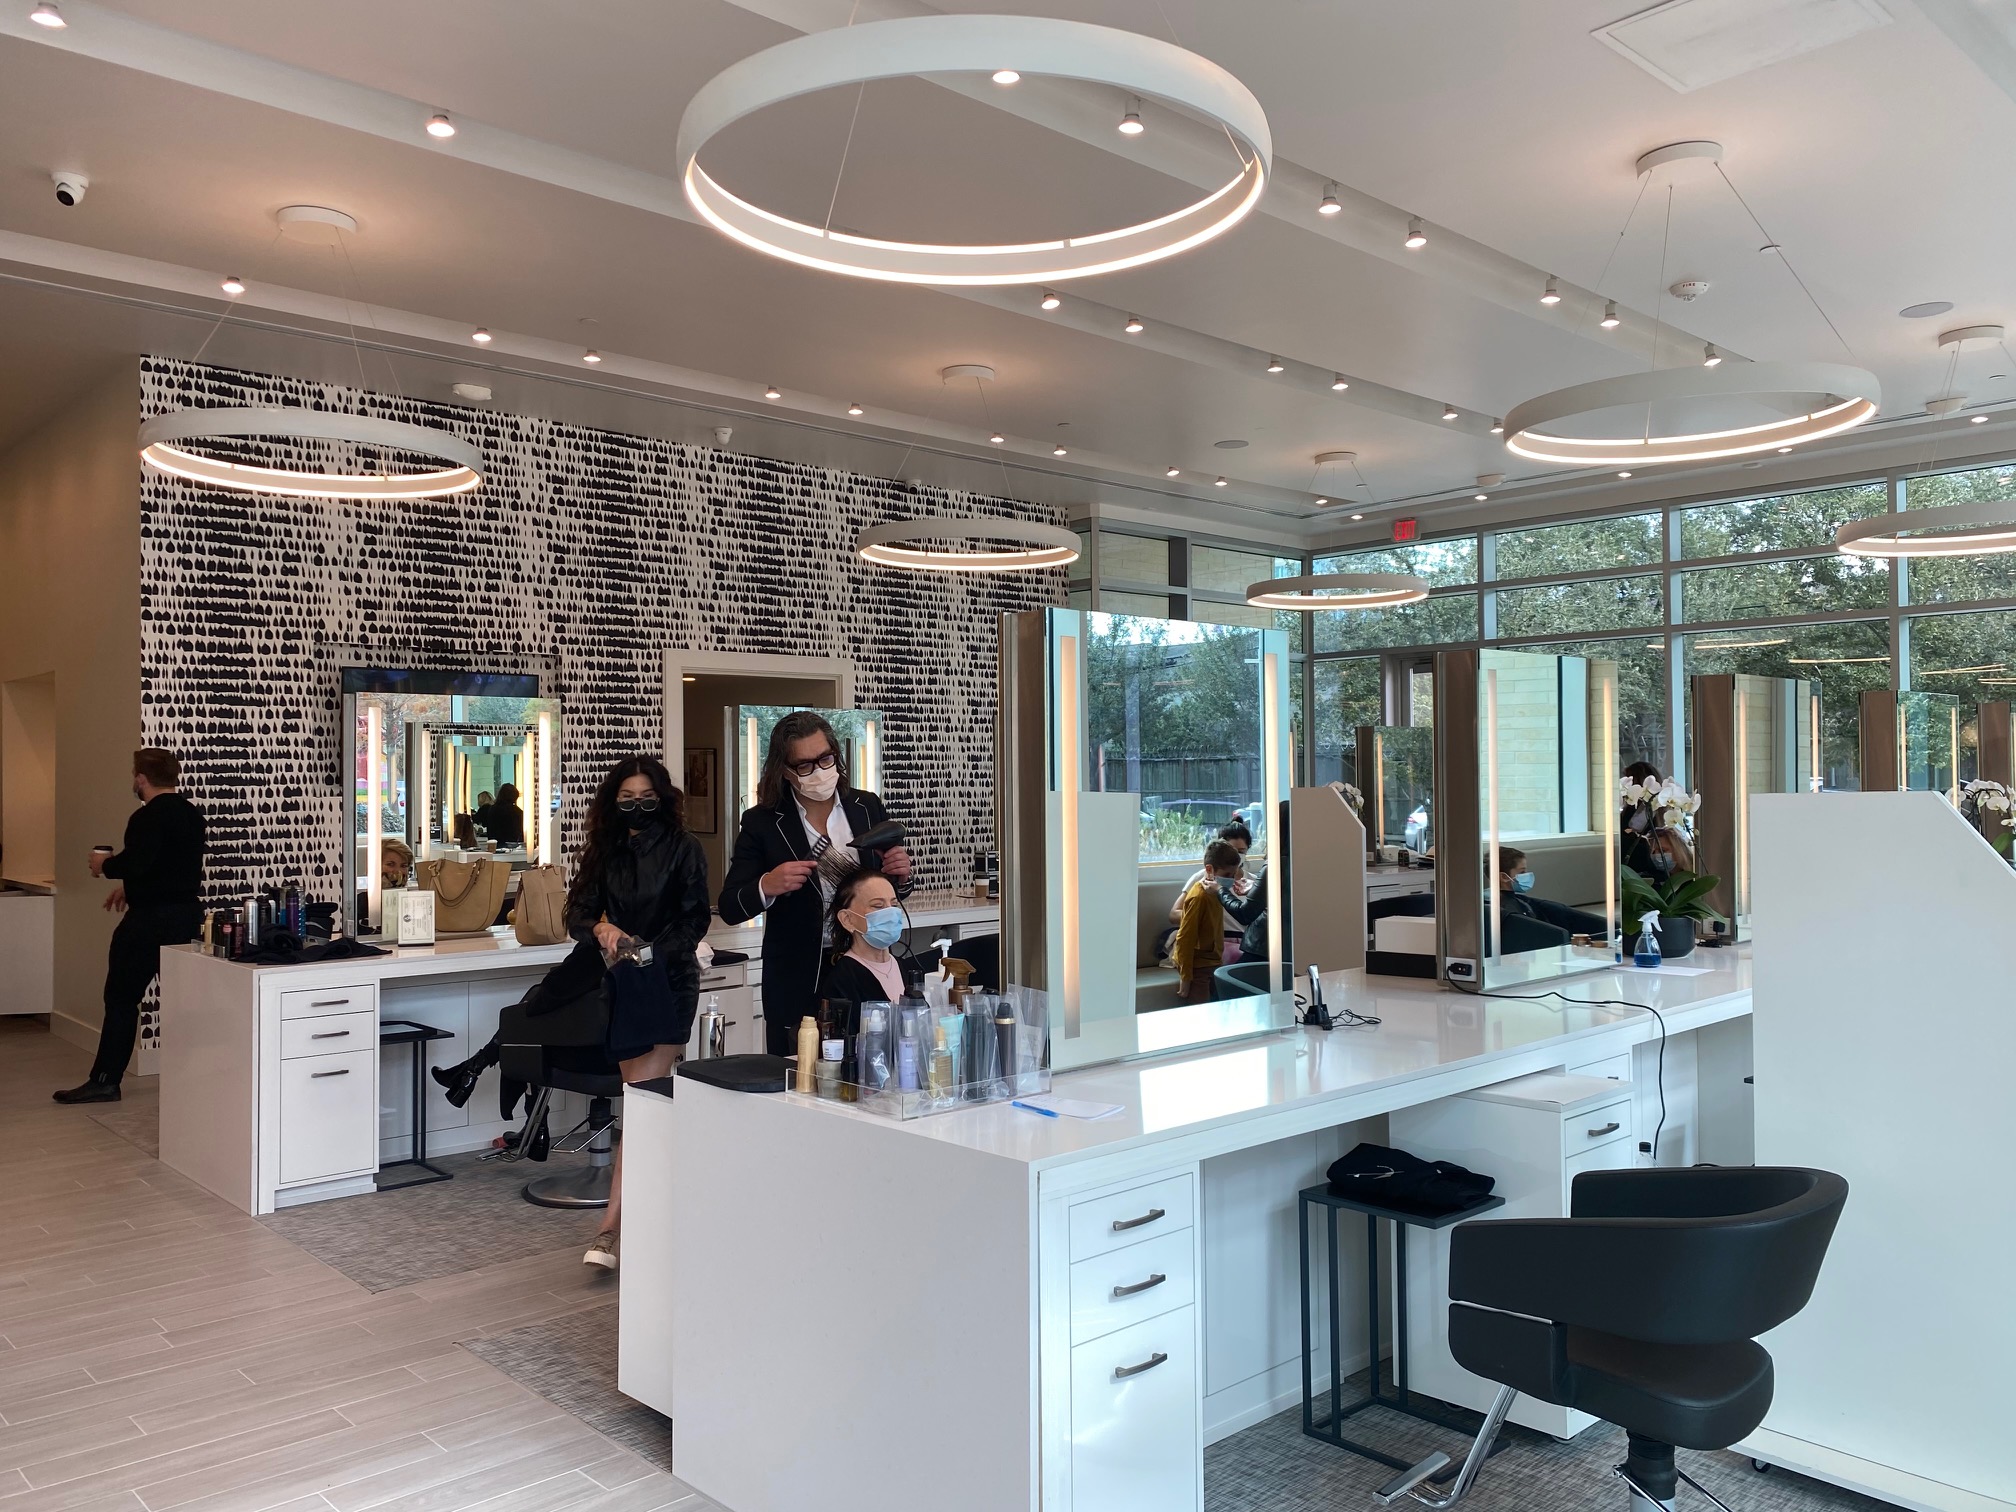 Ceron - PaperCity: Famed Hairstylist Moves Into New Houston Studio  Overlooking Levy Park - Droese Raney